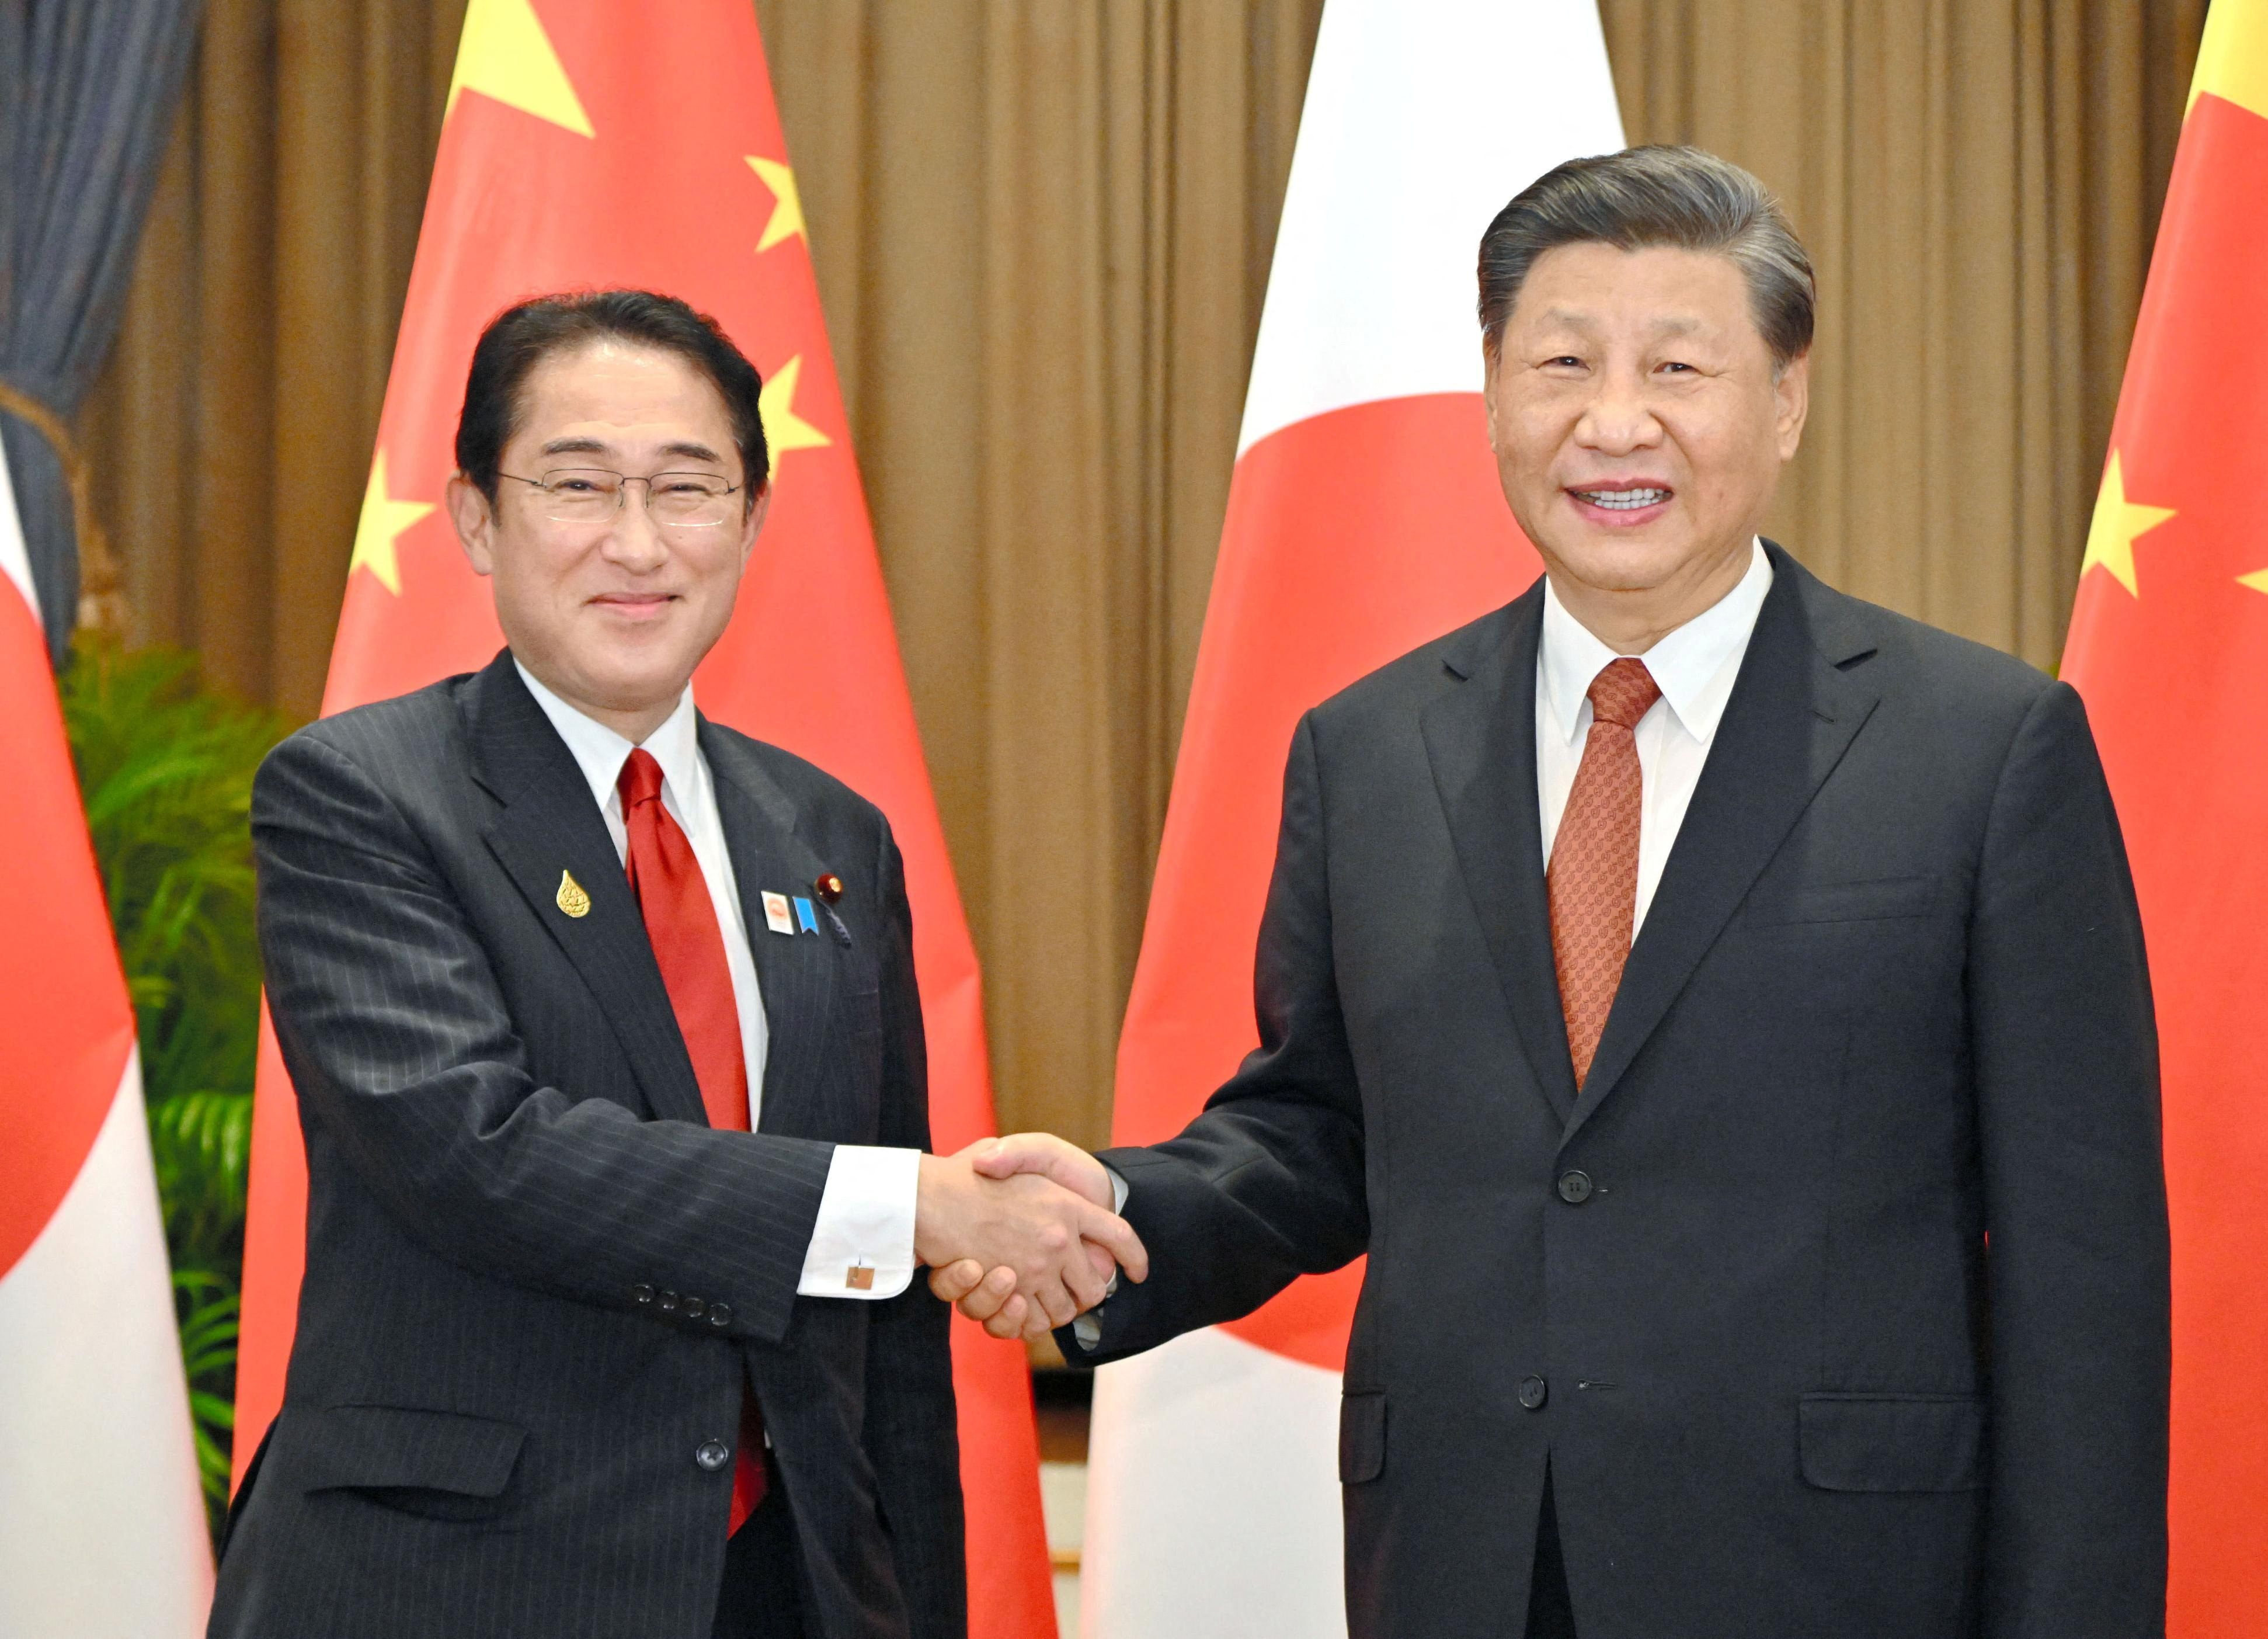 Japanese Prime Minister Fumio Kishida meets Chinese President Xi Jinping on the sidelines of the APEC leaders' summit in Bangkok